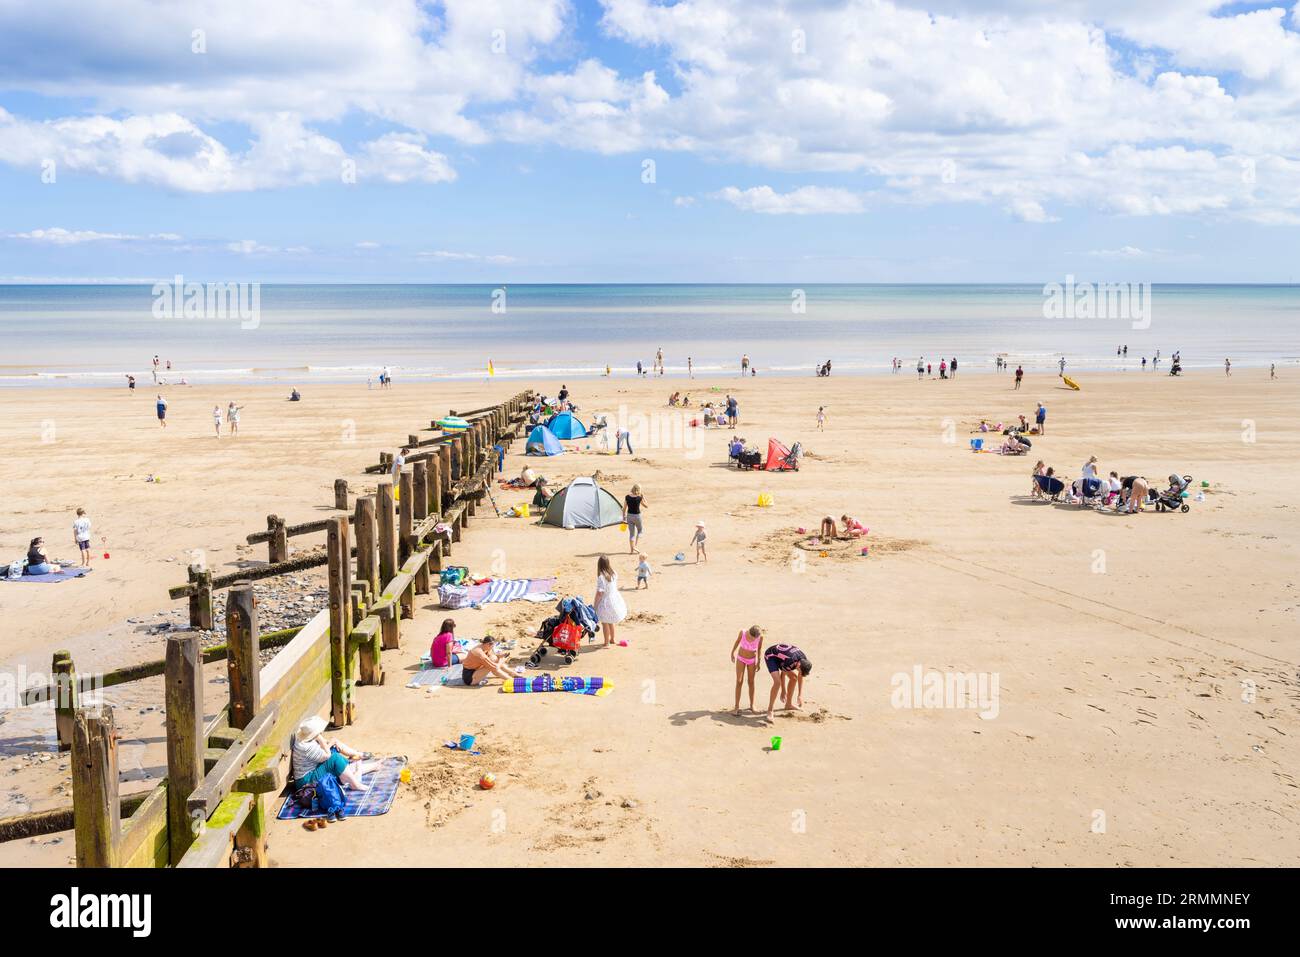 Hornsea beach with wooden groynes and people sunbathing on the large sandy beach at Hornsea East Riding of Yorkshire England UK GB Europe Stock Photo